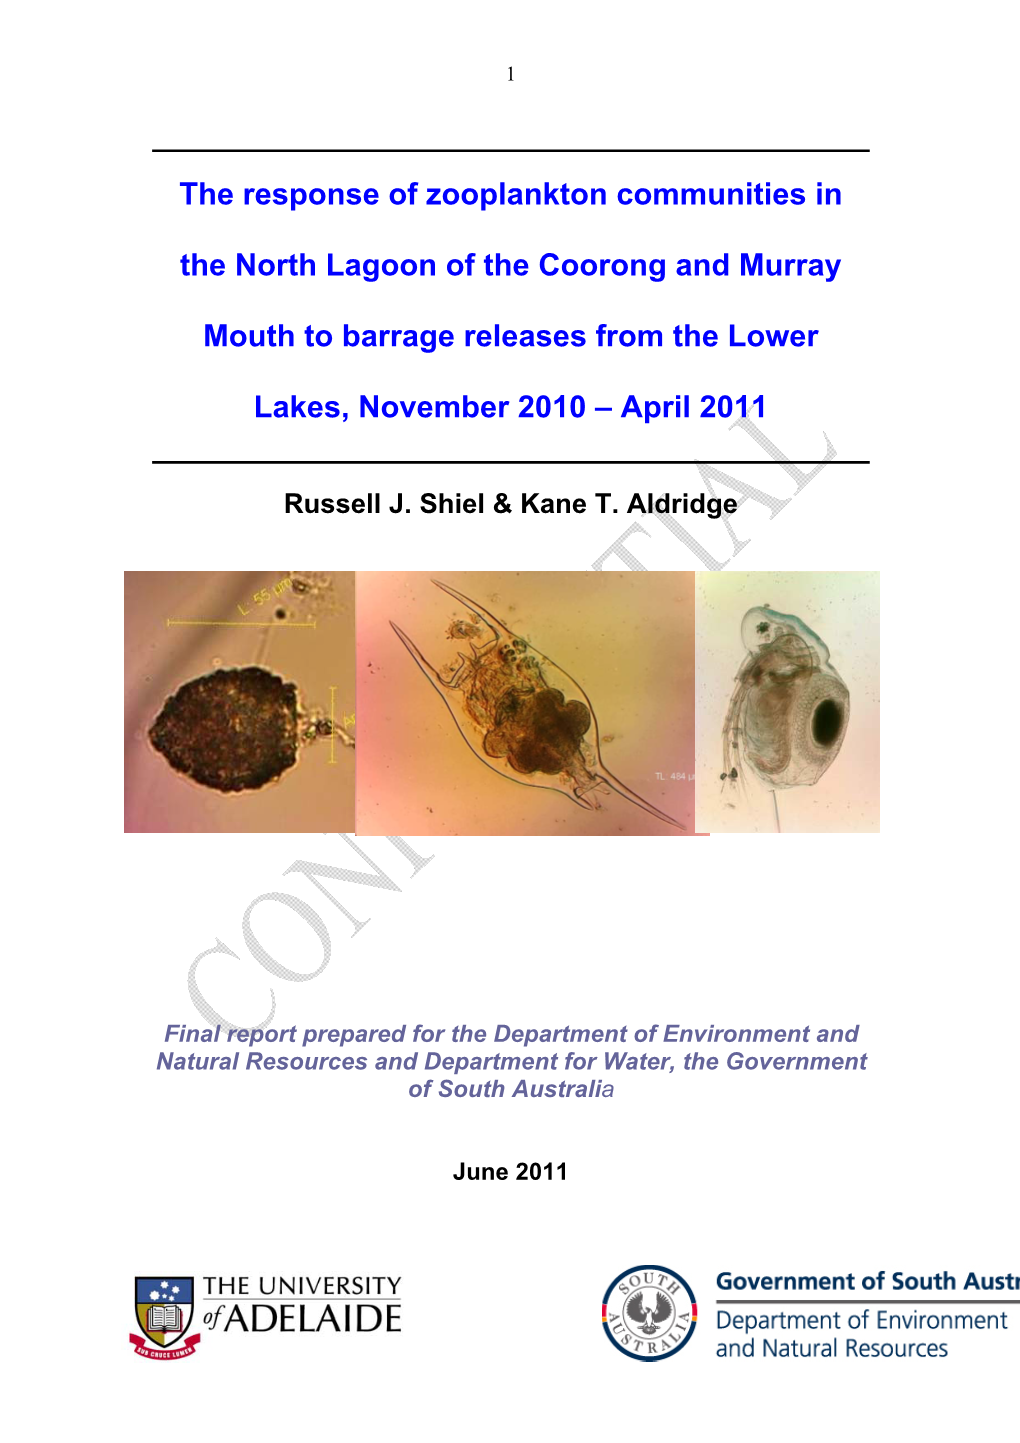 The Response of Zooplankton Communities in the North Lagoon of the Coorong and Murray Mouth to Barrage Releases from the Lower Lakes, November 2010 – January 2011